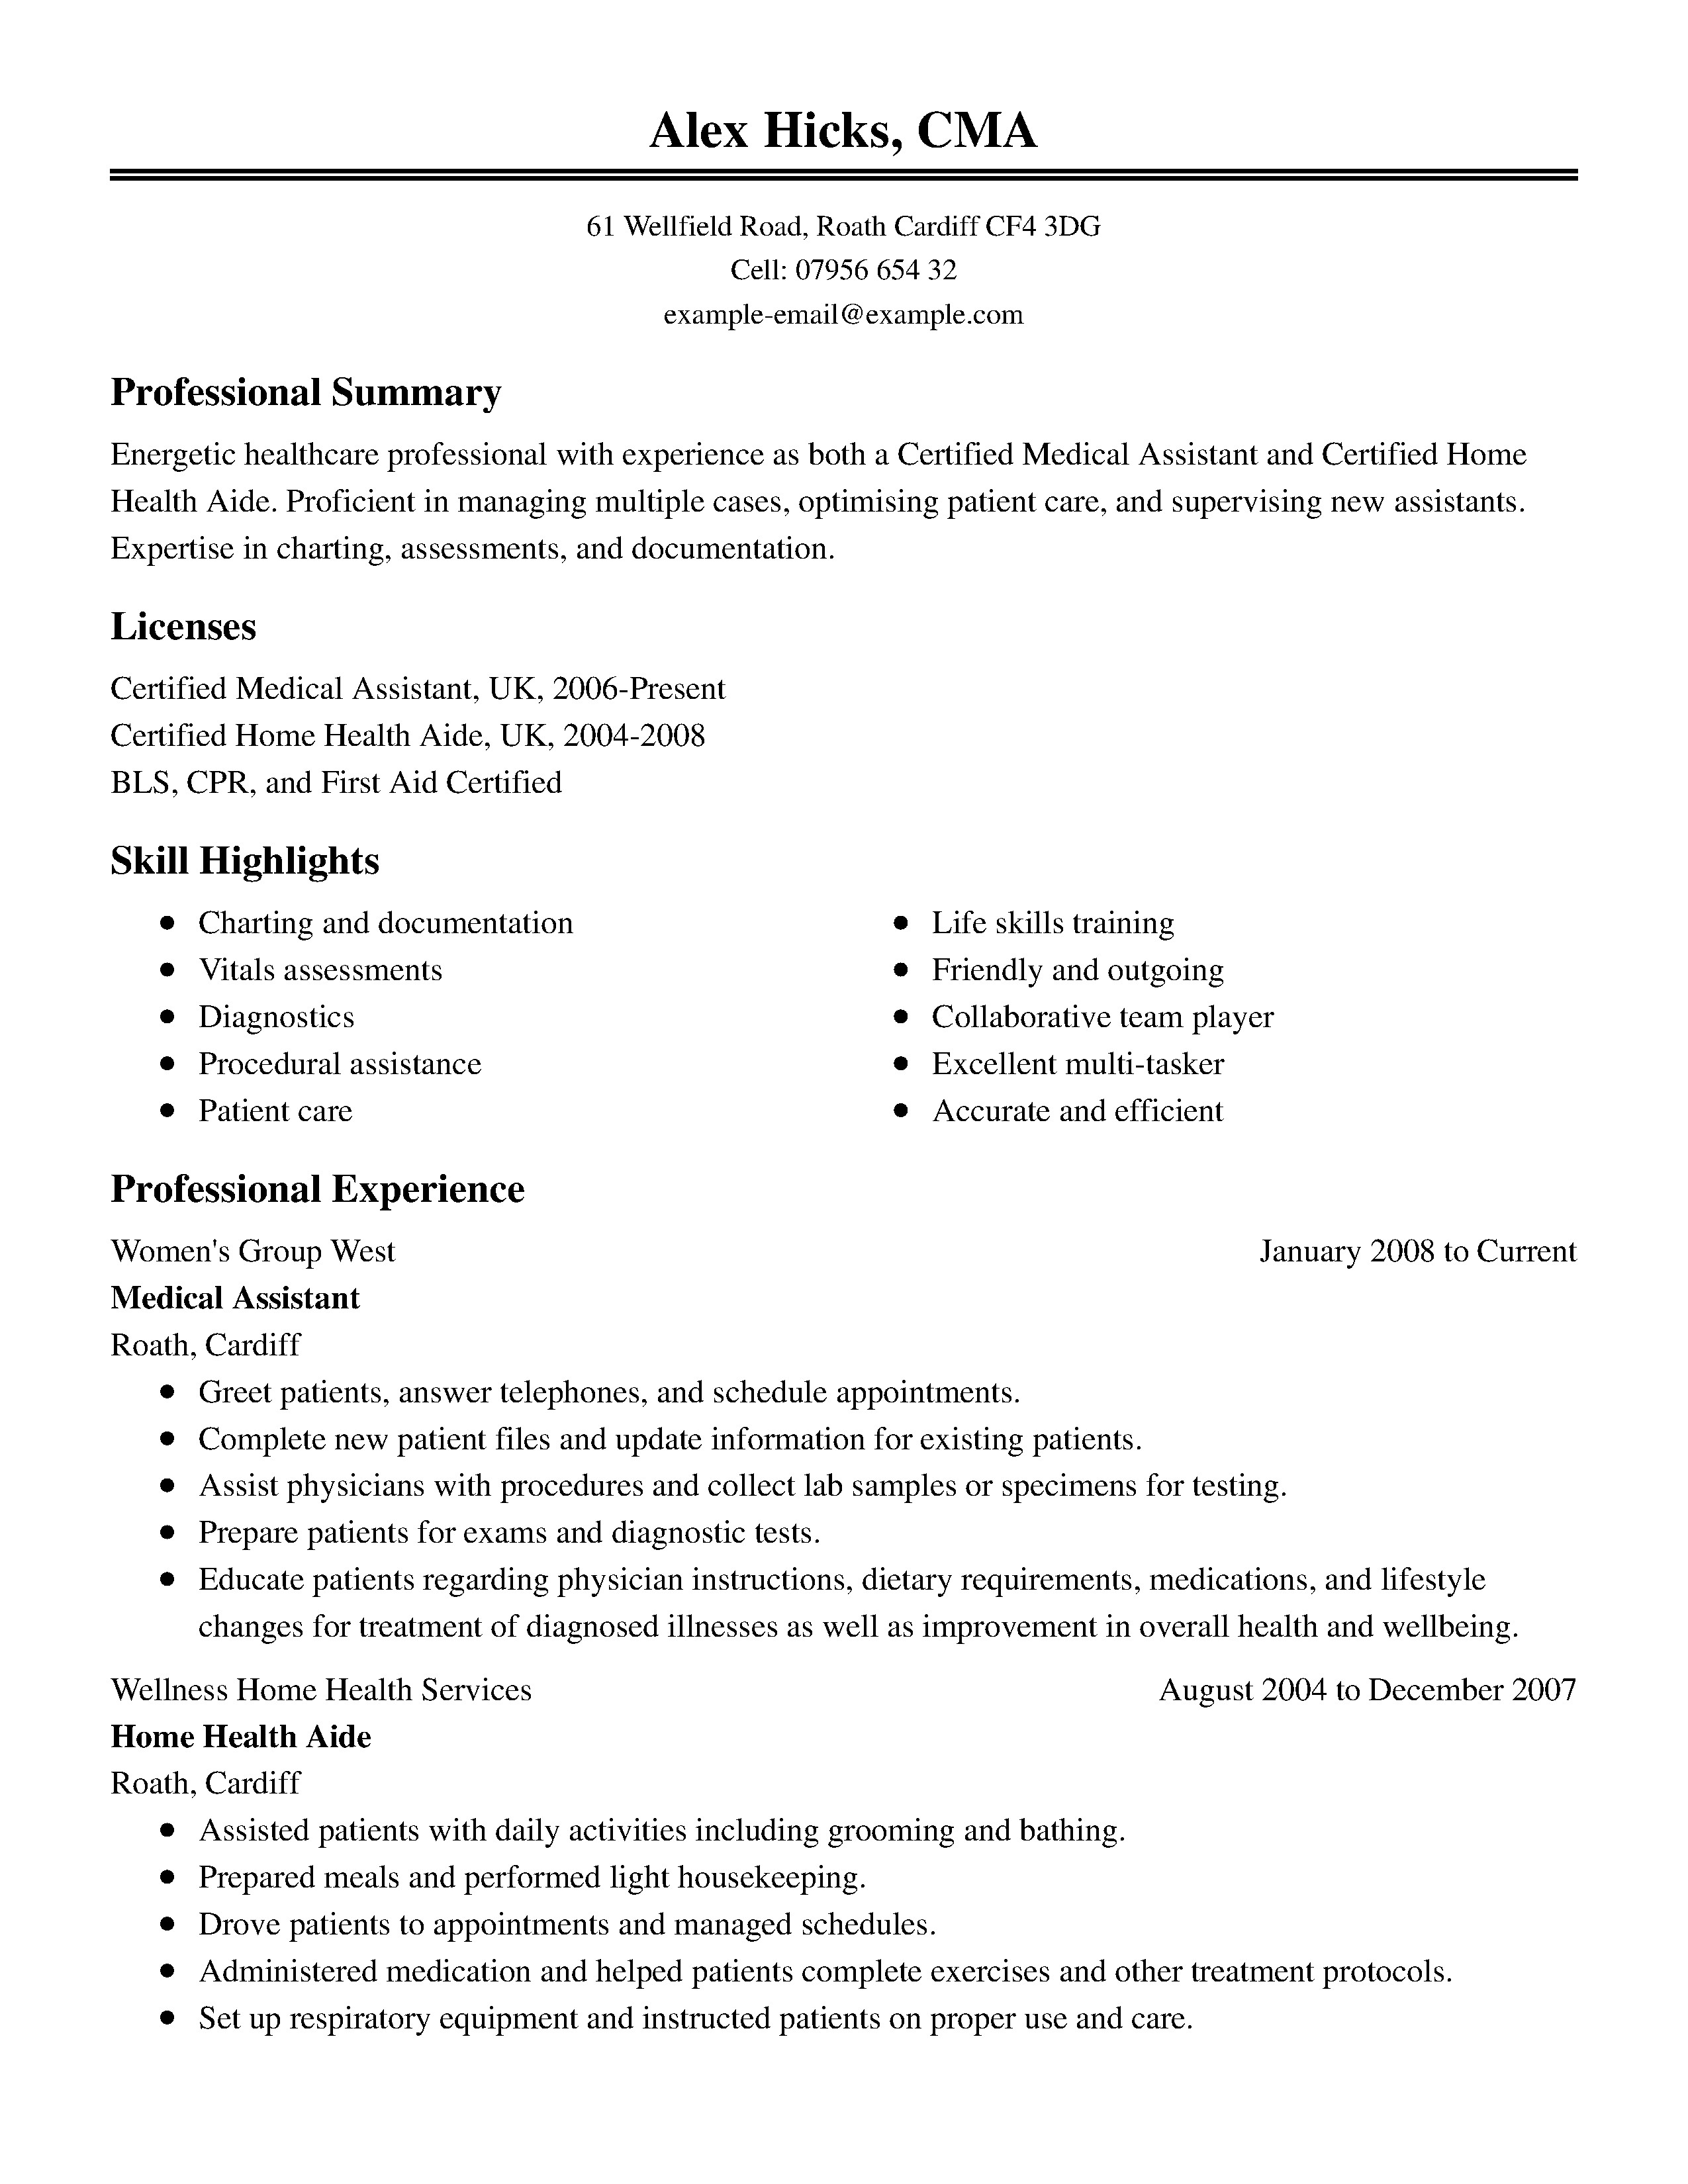 Resume Templates In Word 15 Of the Best Resume Templates for Microsoft Word Fice